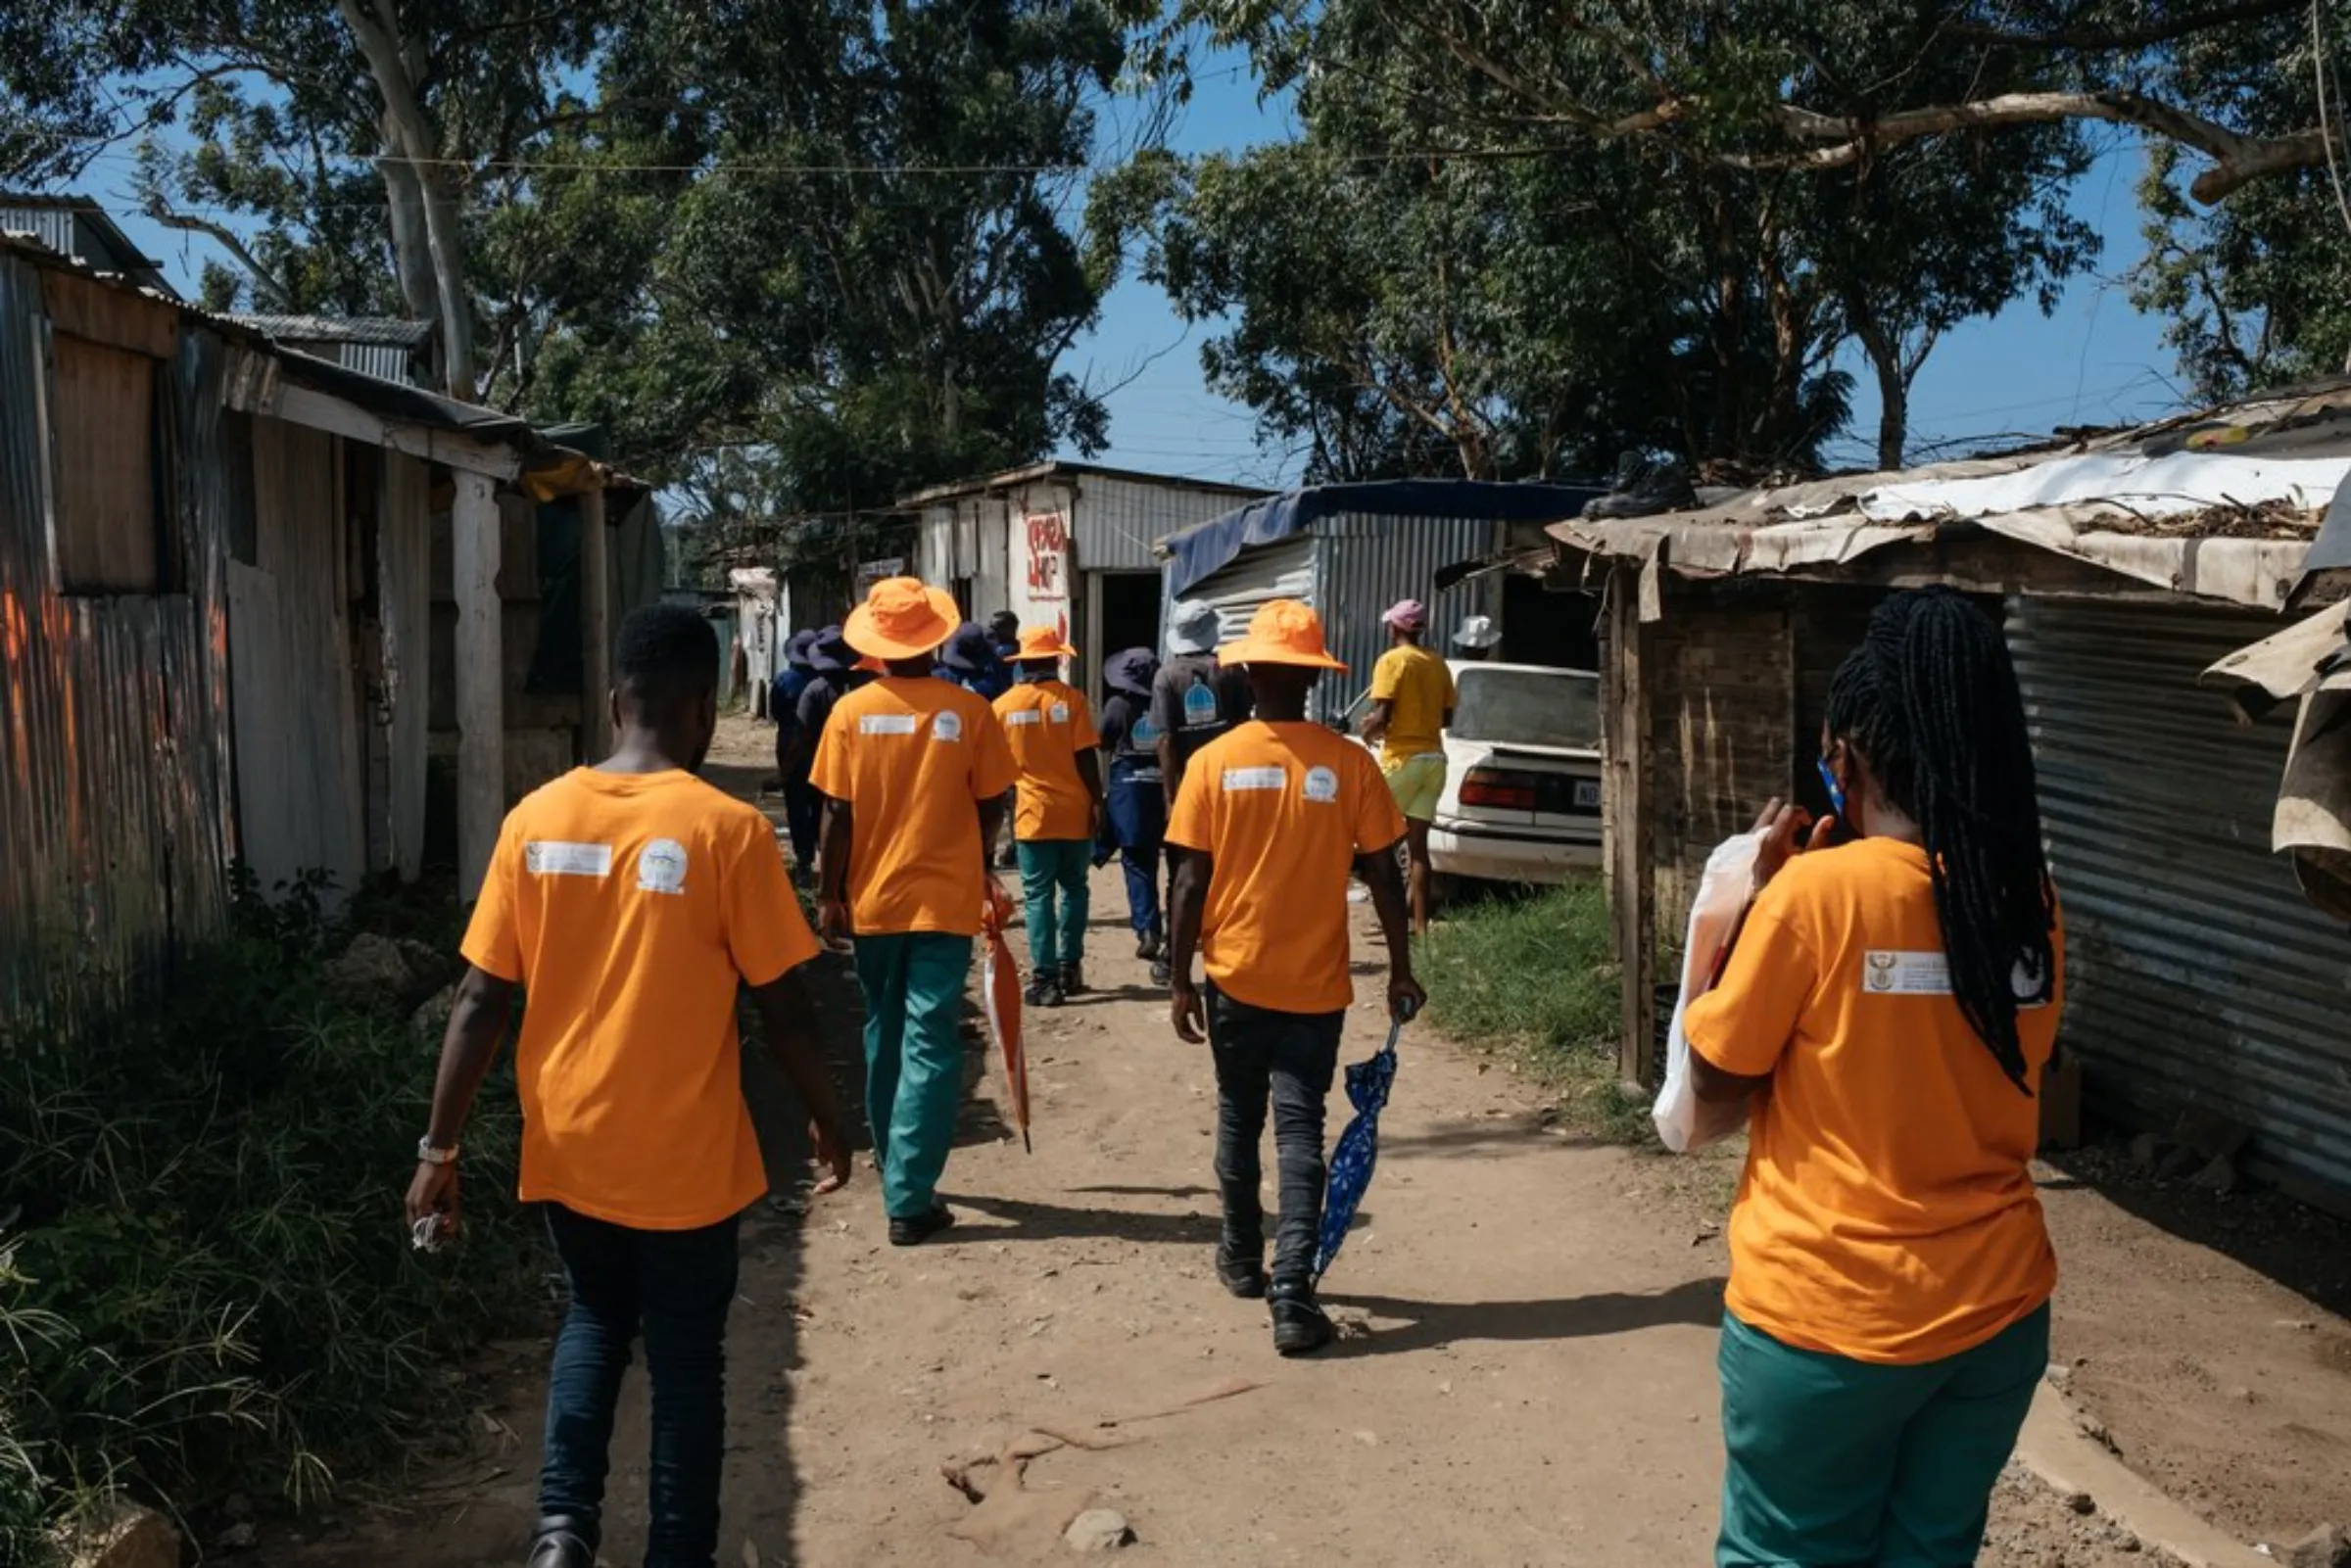 Members of the Enviro Champs initiative take part in a patrol through the Quarry Road informal settlement in Durban, South Africa, March 30, 2021. The initiative employs locals from vulnerable communities, creating job opportunities and helping them be better prepared in the face of climate change impacts such as flooding and extreme weather